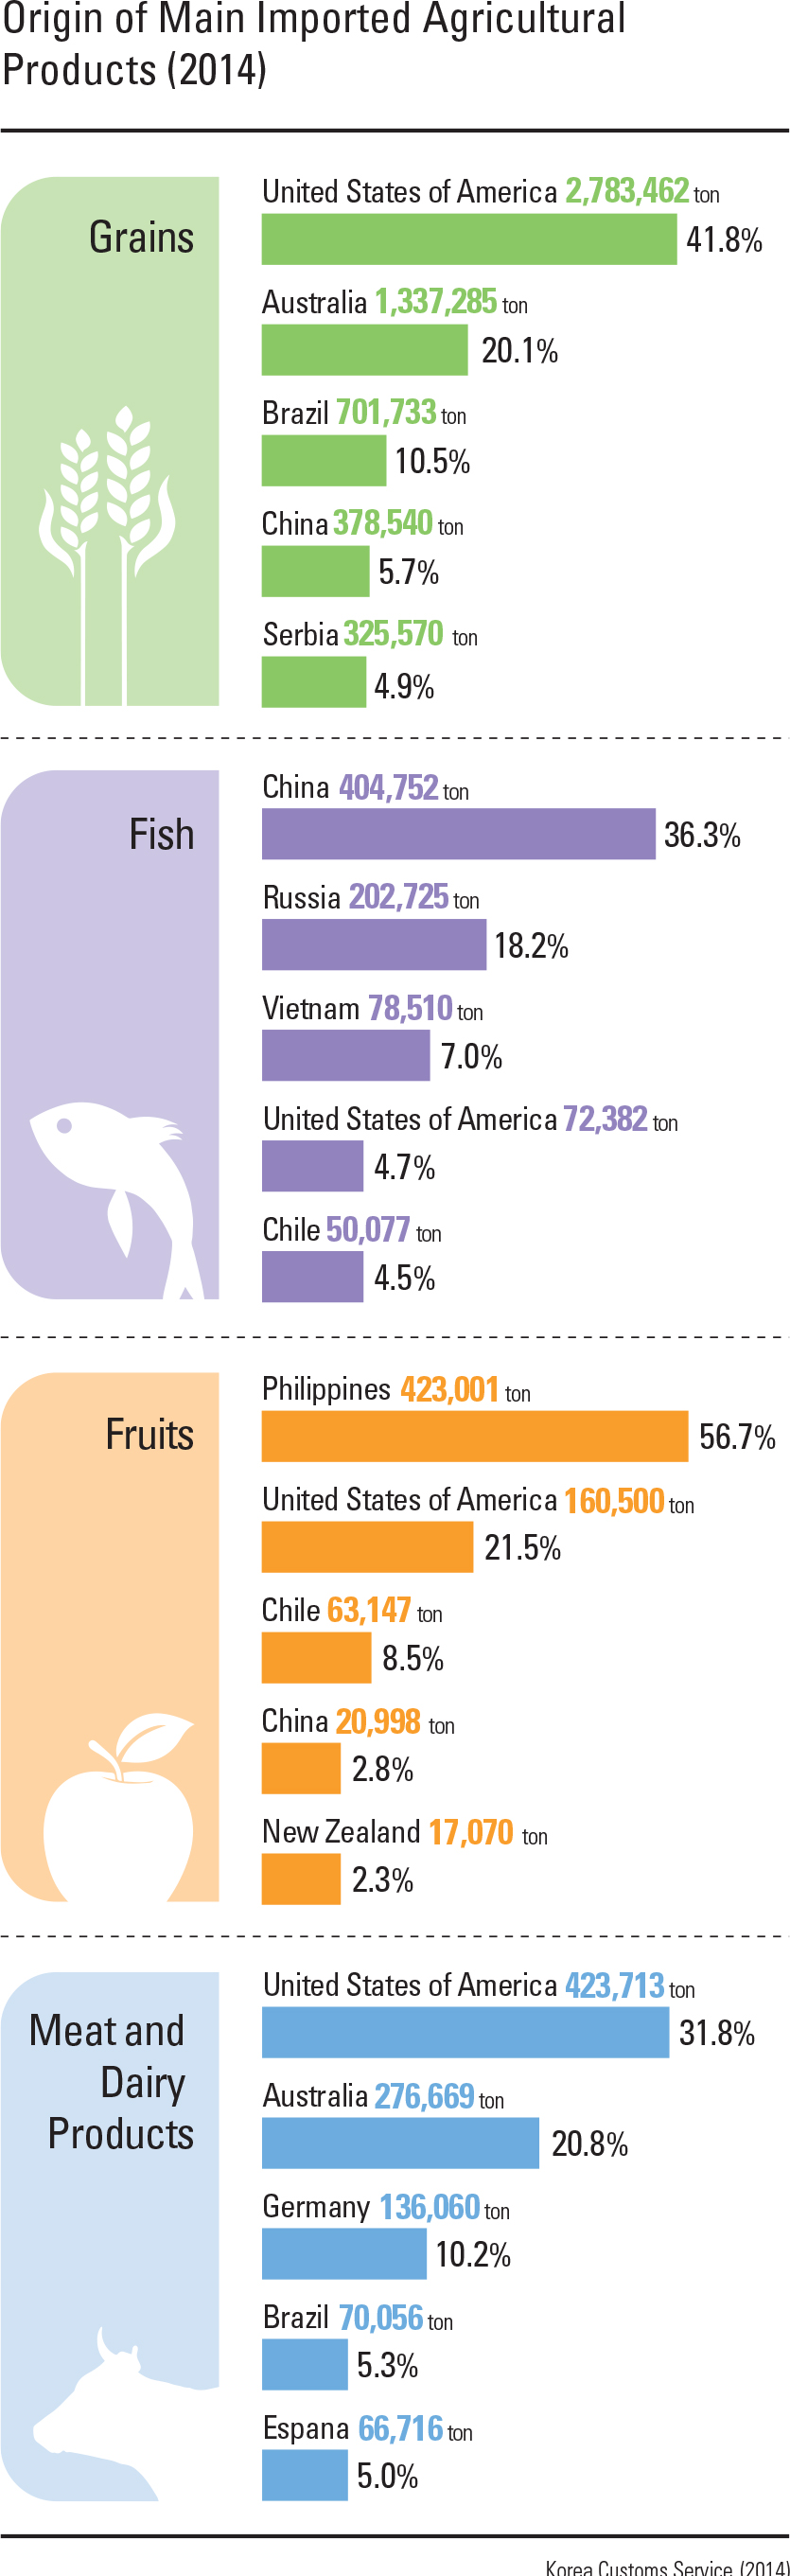 Origin of Main Imported Agricultural Products (2014)